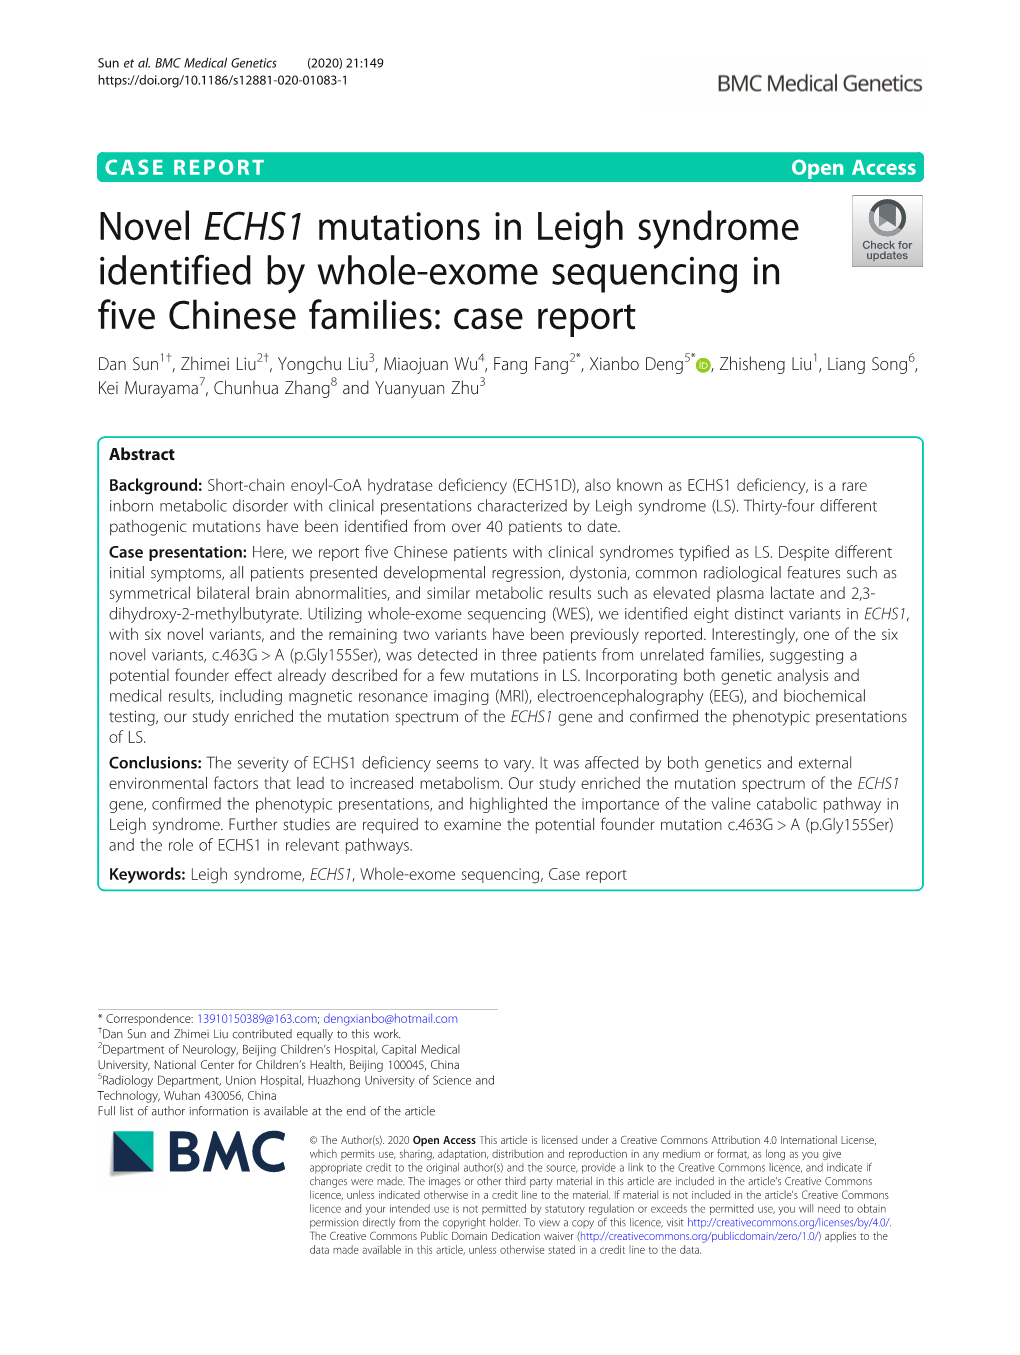 Novel ECHS1 Mutations in Leigh Syndrome Identified by Whole